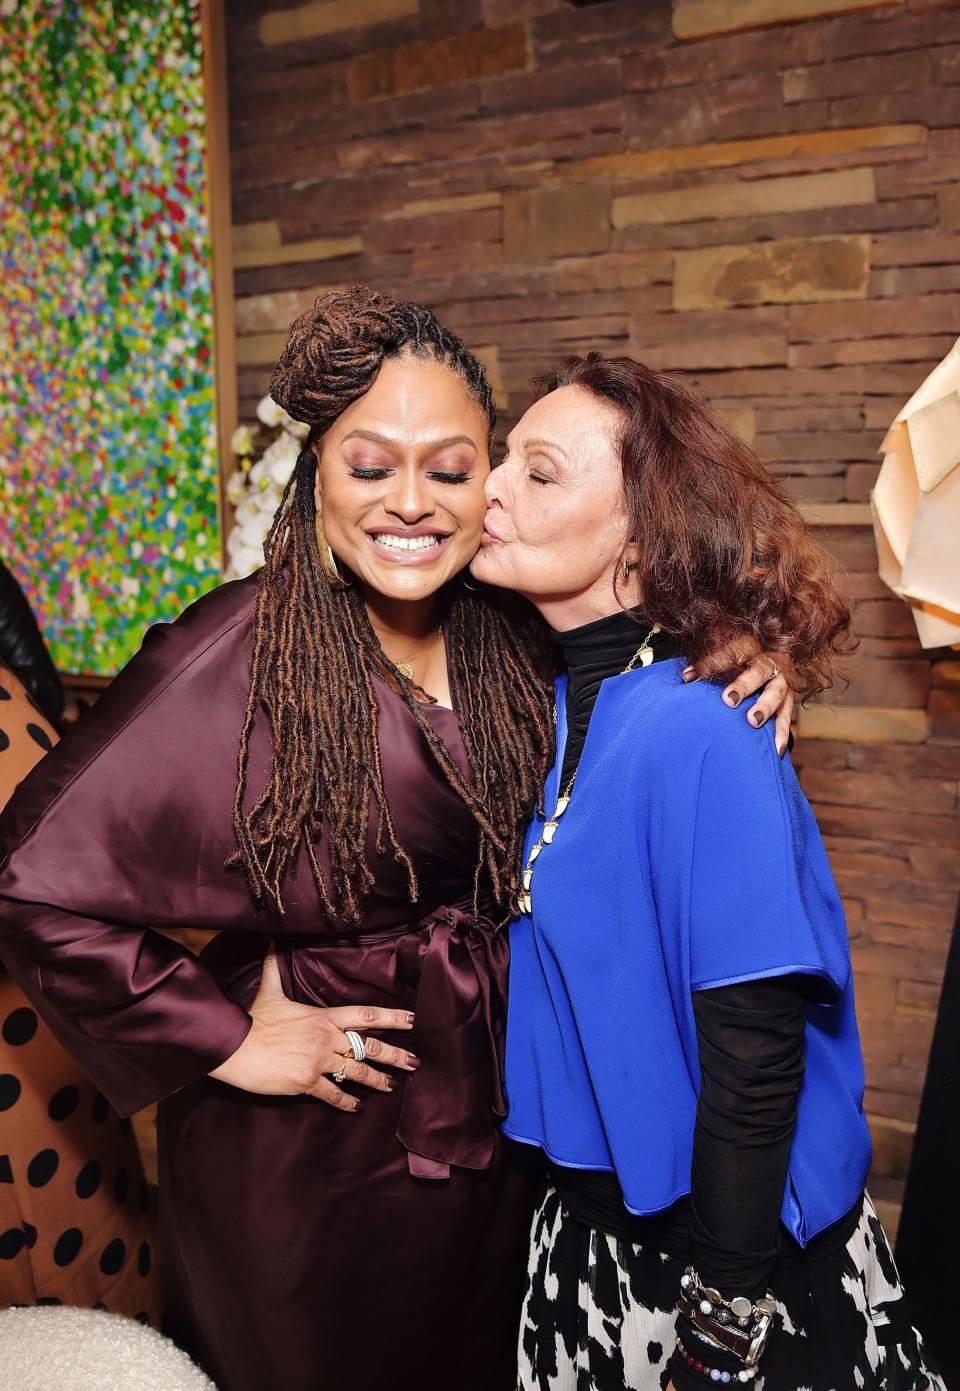 At the home of Diane von Furstenberg, Dawn Hudson, CEO of the Academy of Motion Picture Arts and Sciences; Laura Dern; Ava DuVernay; and Emma Thomas hosted an intimate luncheon honoring the women Oscar nominees.